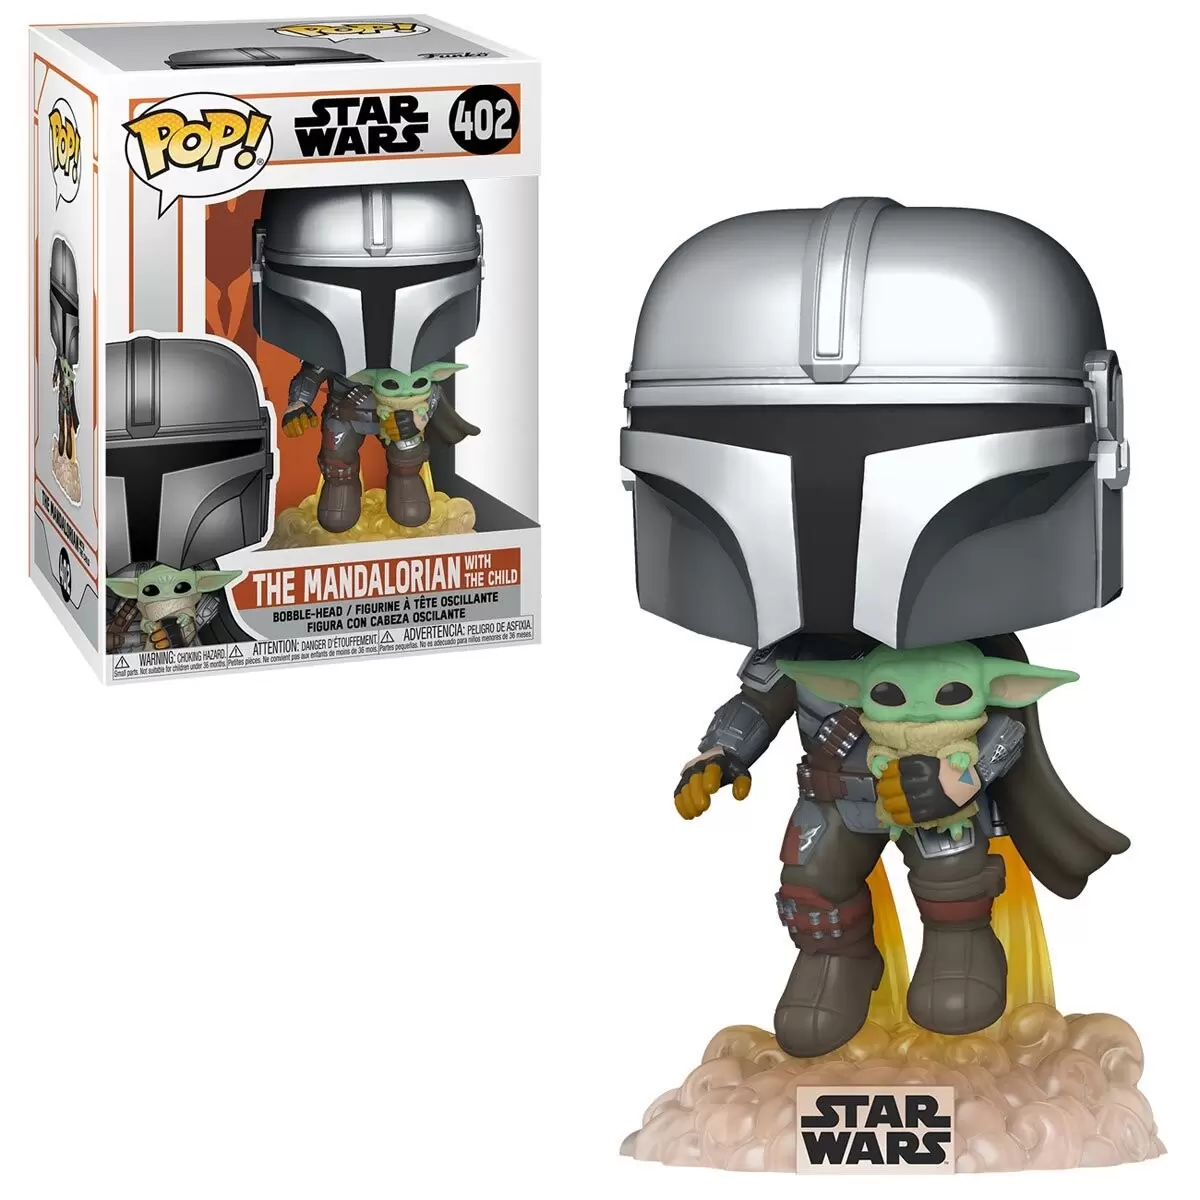 POP! Star Wars - The Mandalorian with The Child